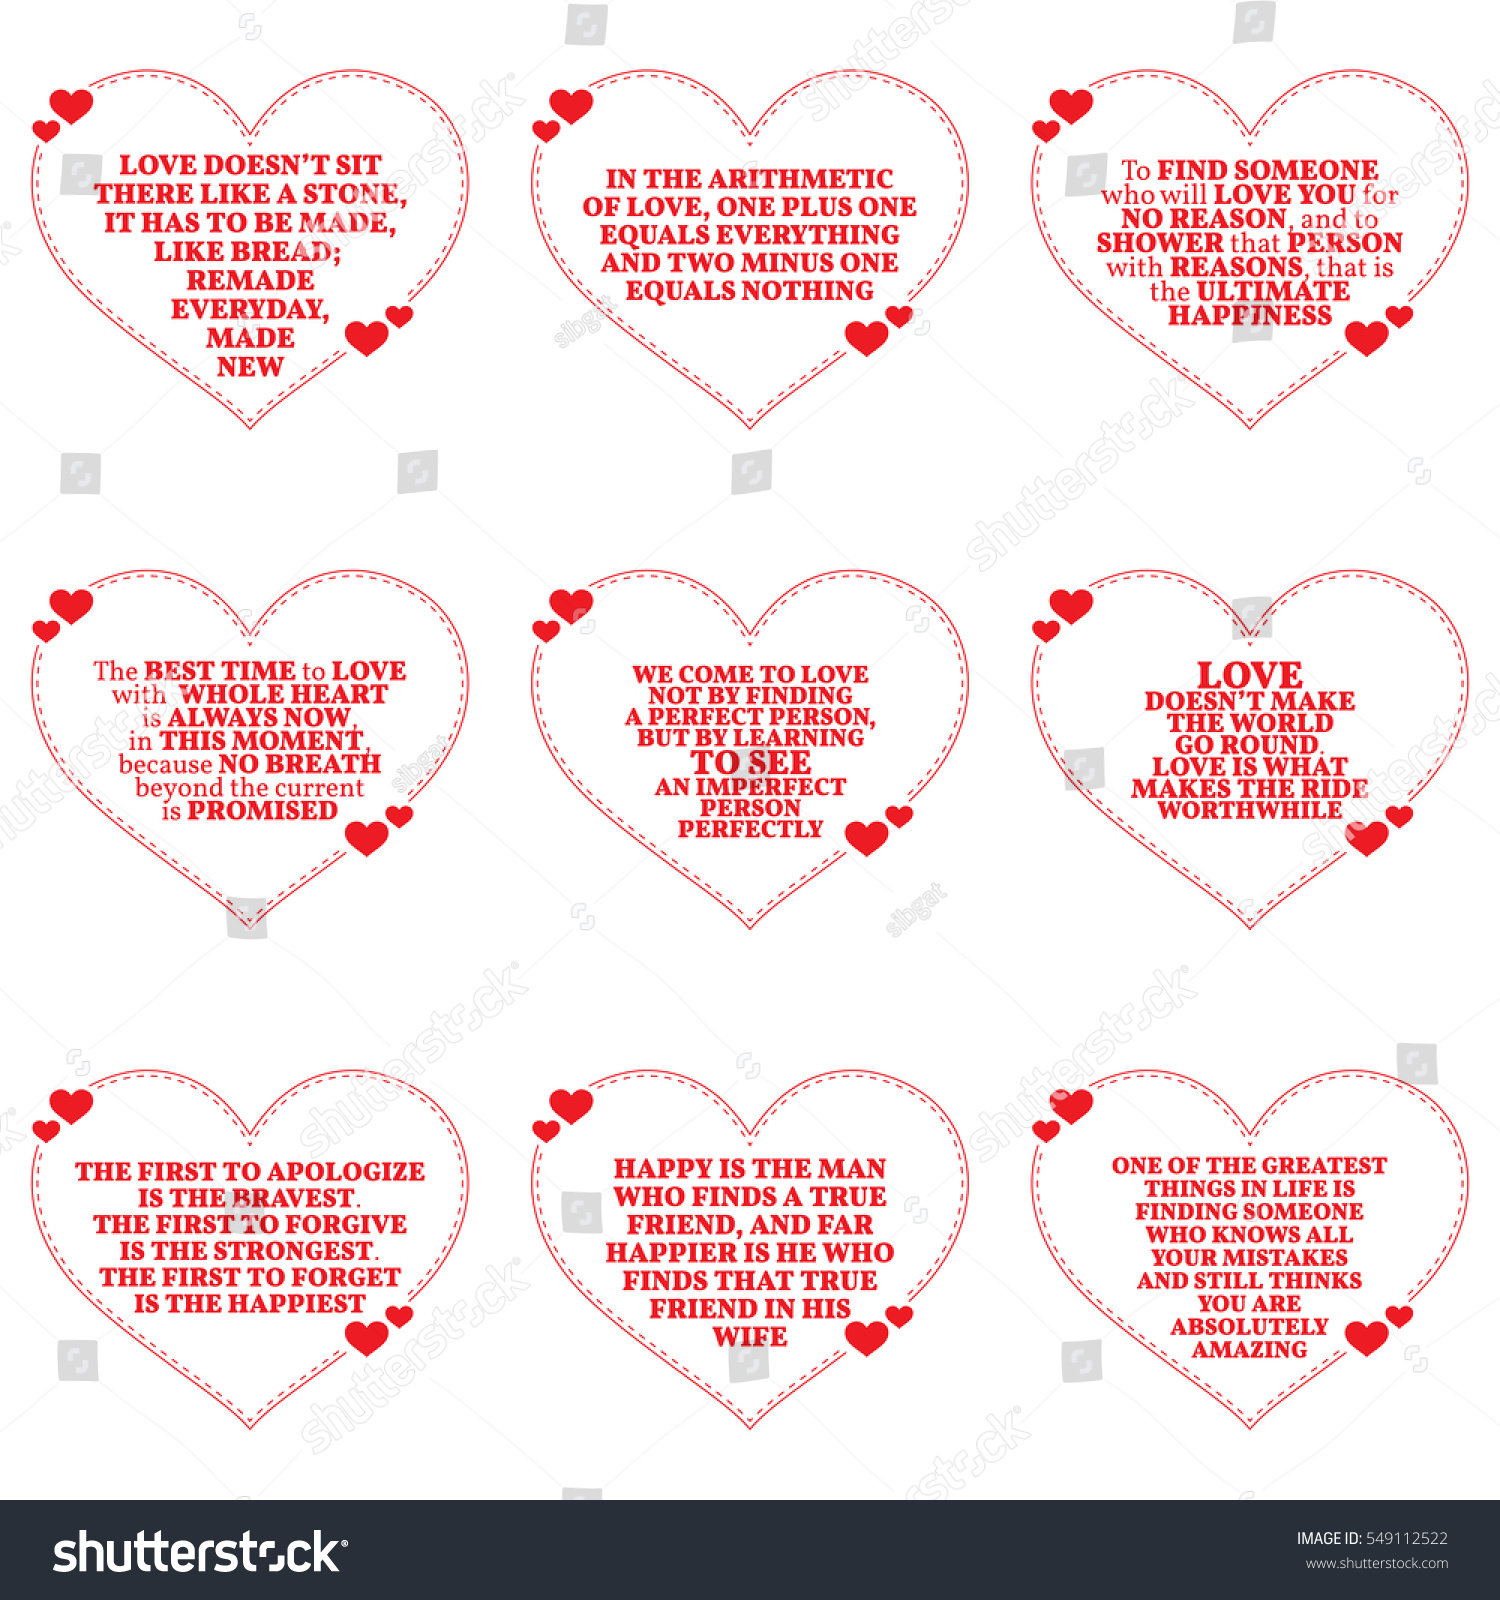 Set of quotes about love over white background Simple heart shape design Vector illustration